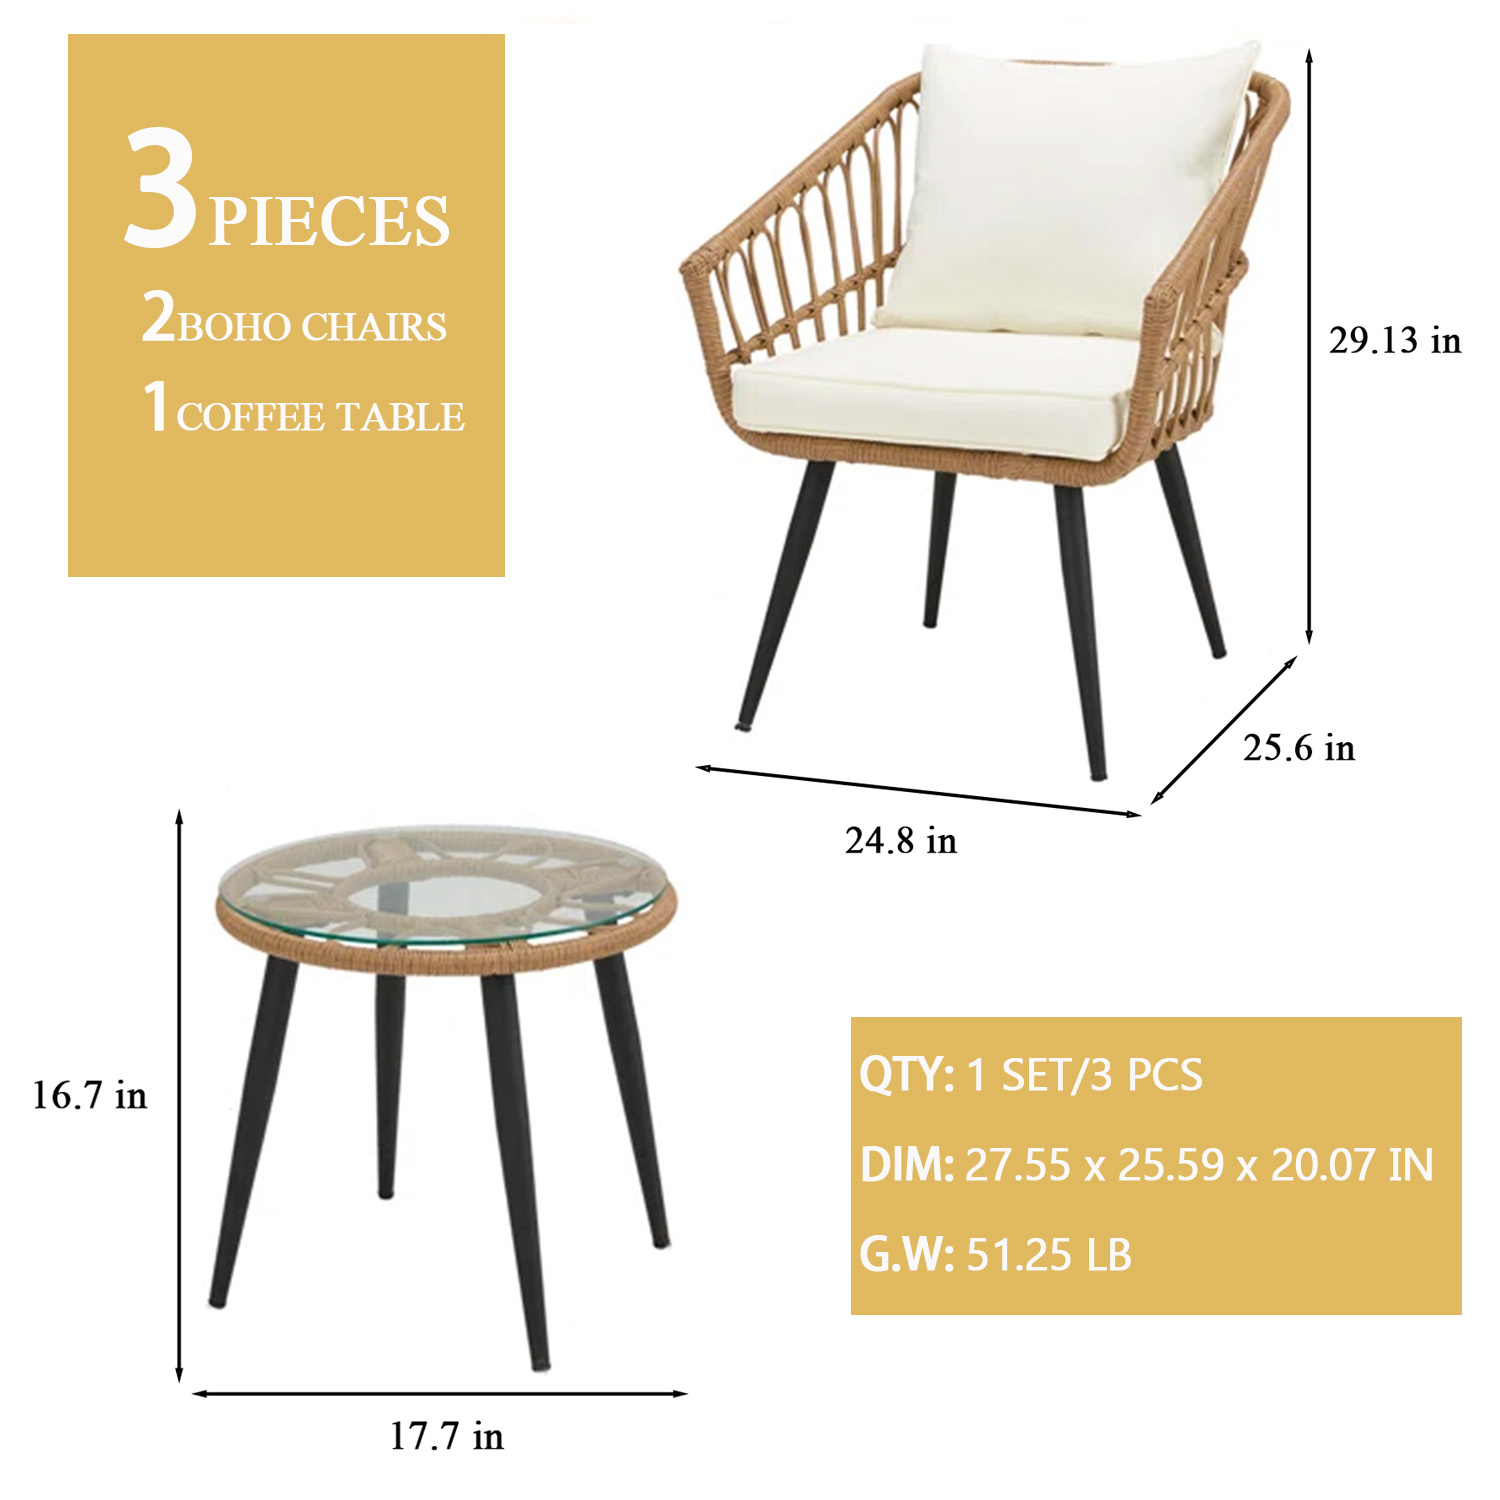 3 Pieces Patio Conversation Set Outdoor Furniture Wicker Rattan Chair with Cushions Bistro Sets Glass Top Coffee Side Table Seating Sectional Garden Balcony Backyard Poolside Sunroom Boho - image 3 of 7